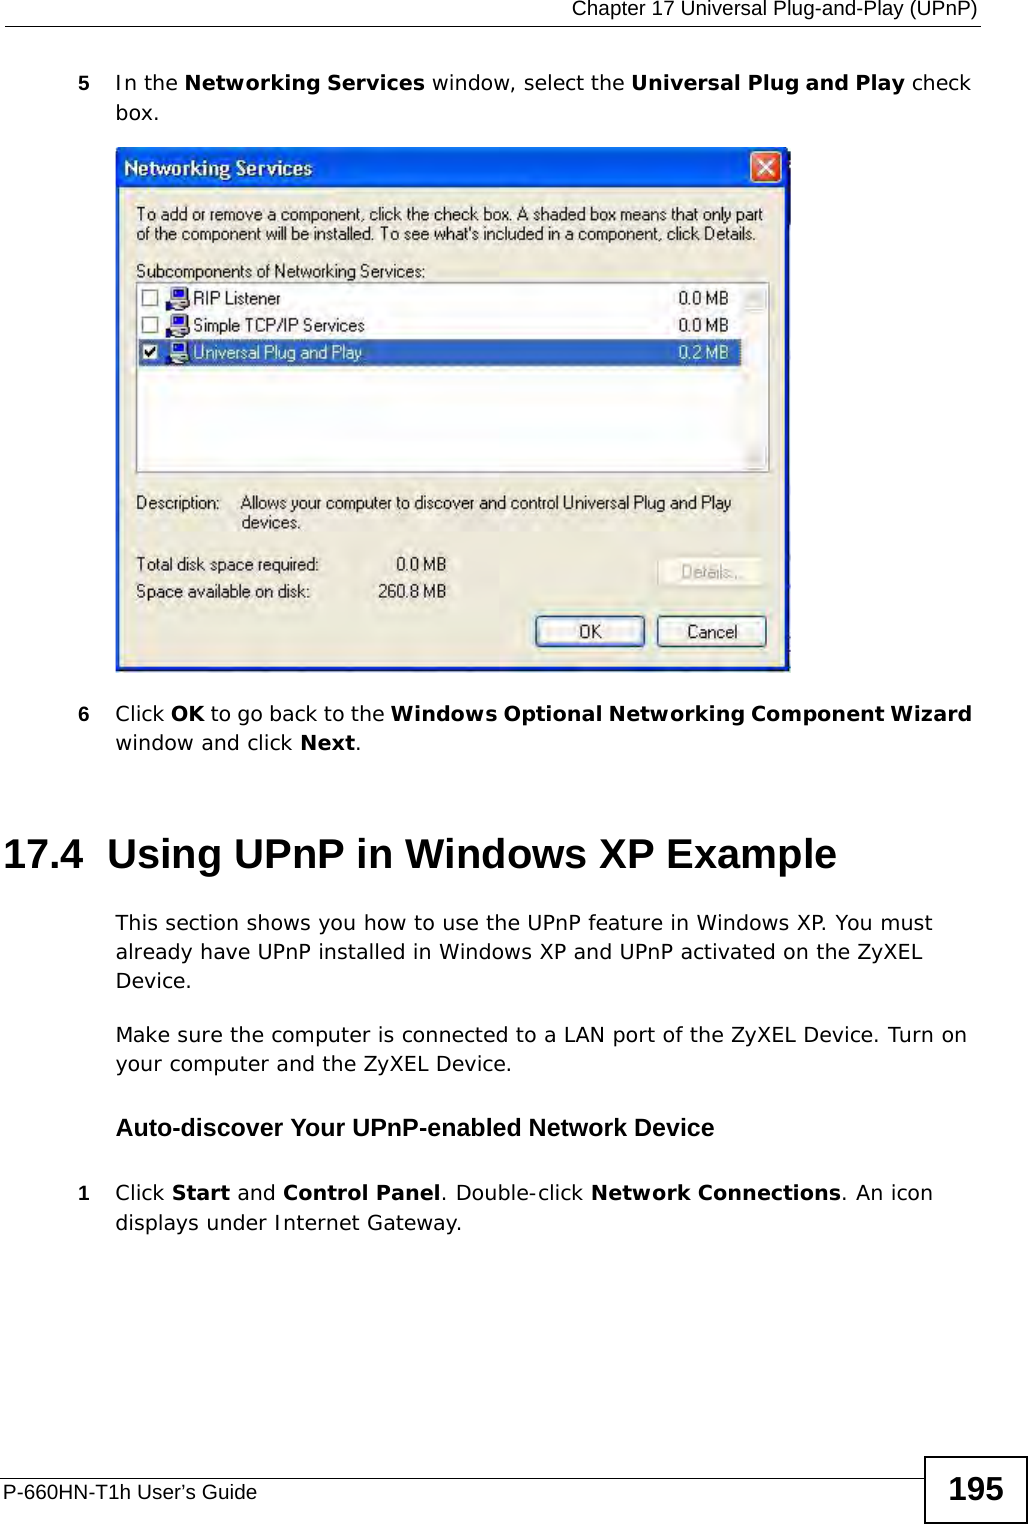  Chapter 17 Universal Plug-and-Play (UPnP)P-660HN-T1h User’s Guide 1955In the Networking Services window, select the Universal Plug and Play check box. Networking Services6Click OK to go back to the Windows Optional Networking Component Wizard window and click Next. 17.4  Using UPnP in Windows XP ExampleThis section shows you how to use the UPnP feature in Windows XP. You must already have UPnP installed in Windows XP and UPnP activated on the ZyXEL Device.Make sure the computer is connected to a LAN port of the ZyXEL Device. Turn on your computer and the ZyXEL Device. Auto-discover Your UPnP-enabled Network Device1Click Start and Control Panel. Double-click Network Connections. An icon displays under Internet Gateway.